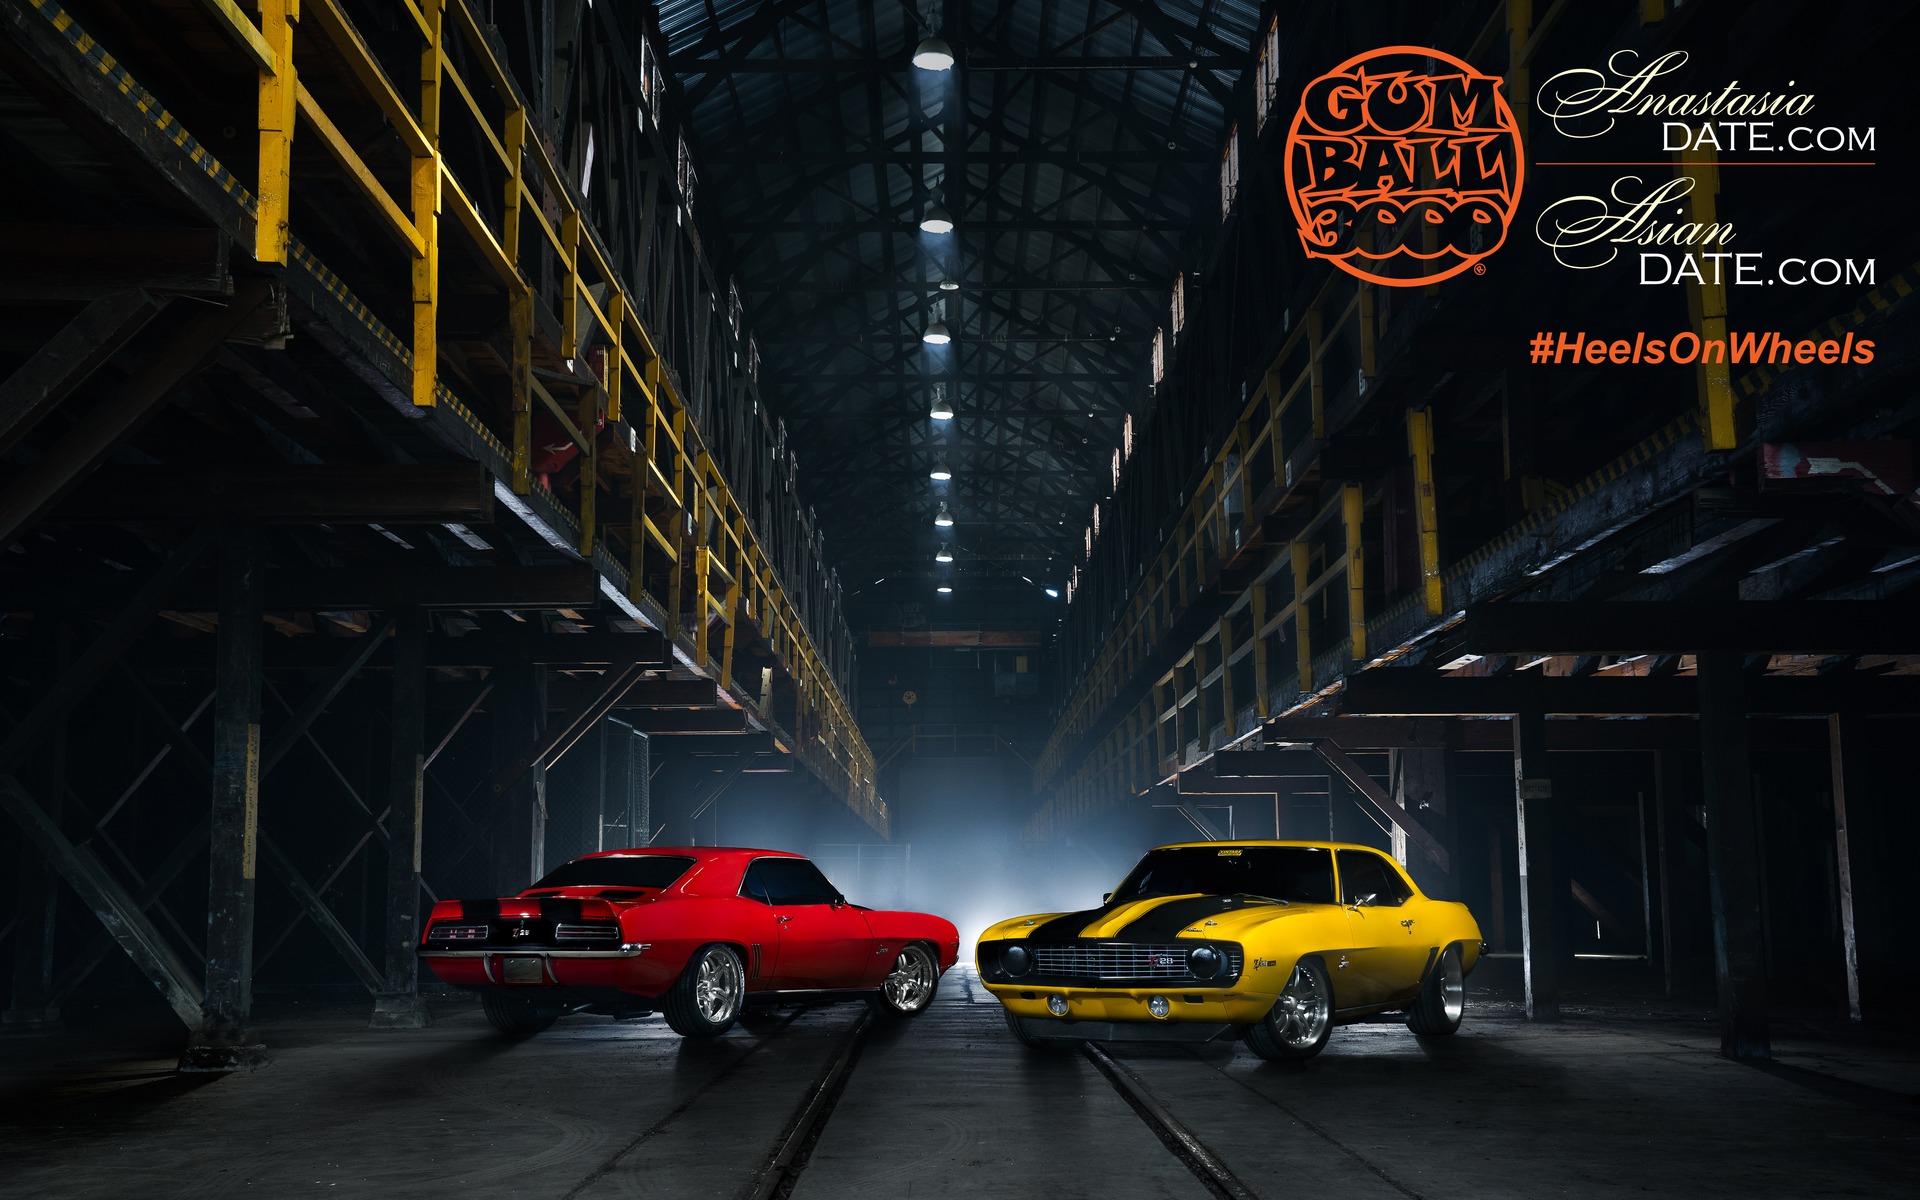 The Car Guide is on the 2015 Gumball 3000 Rally.